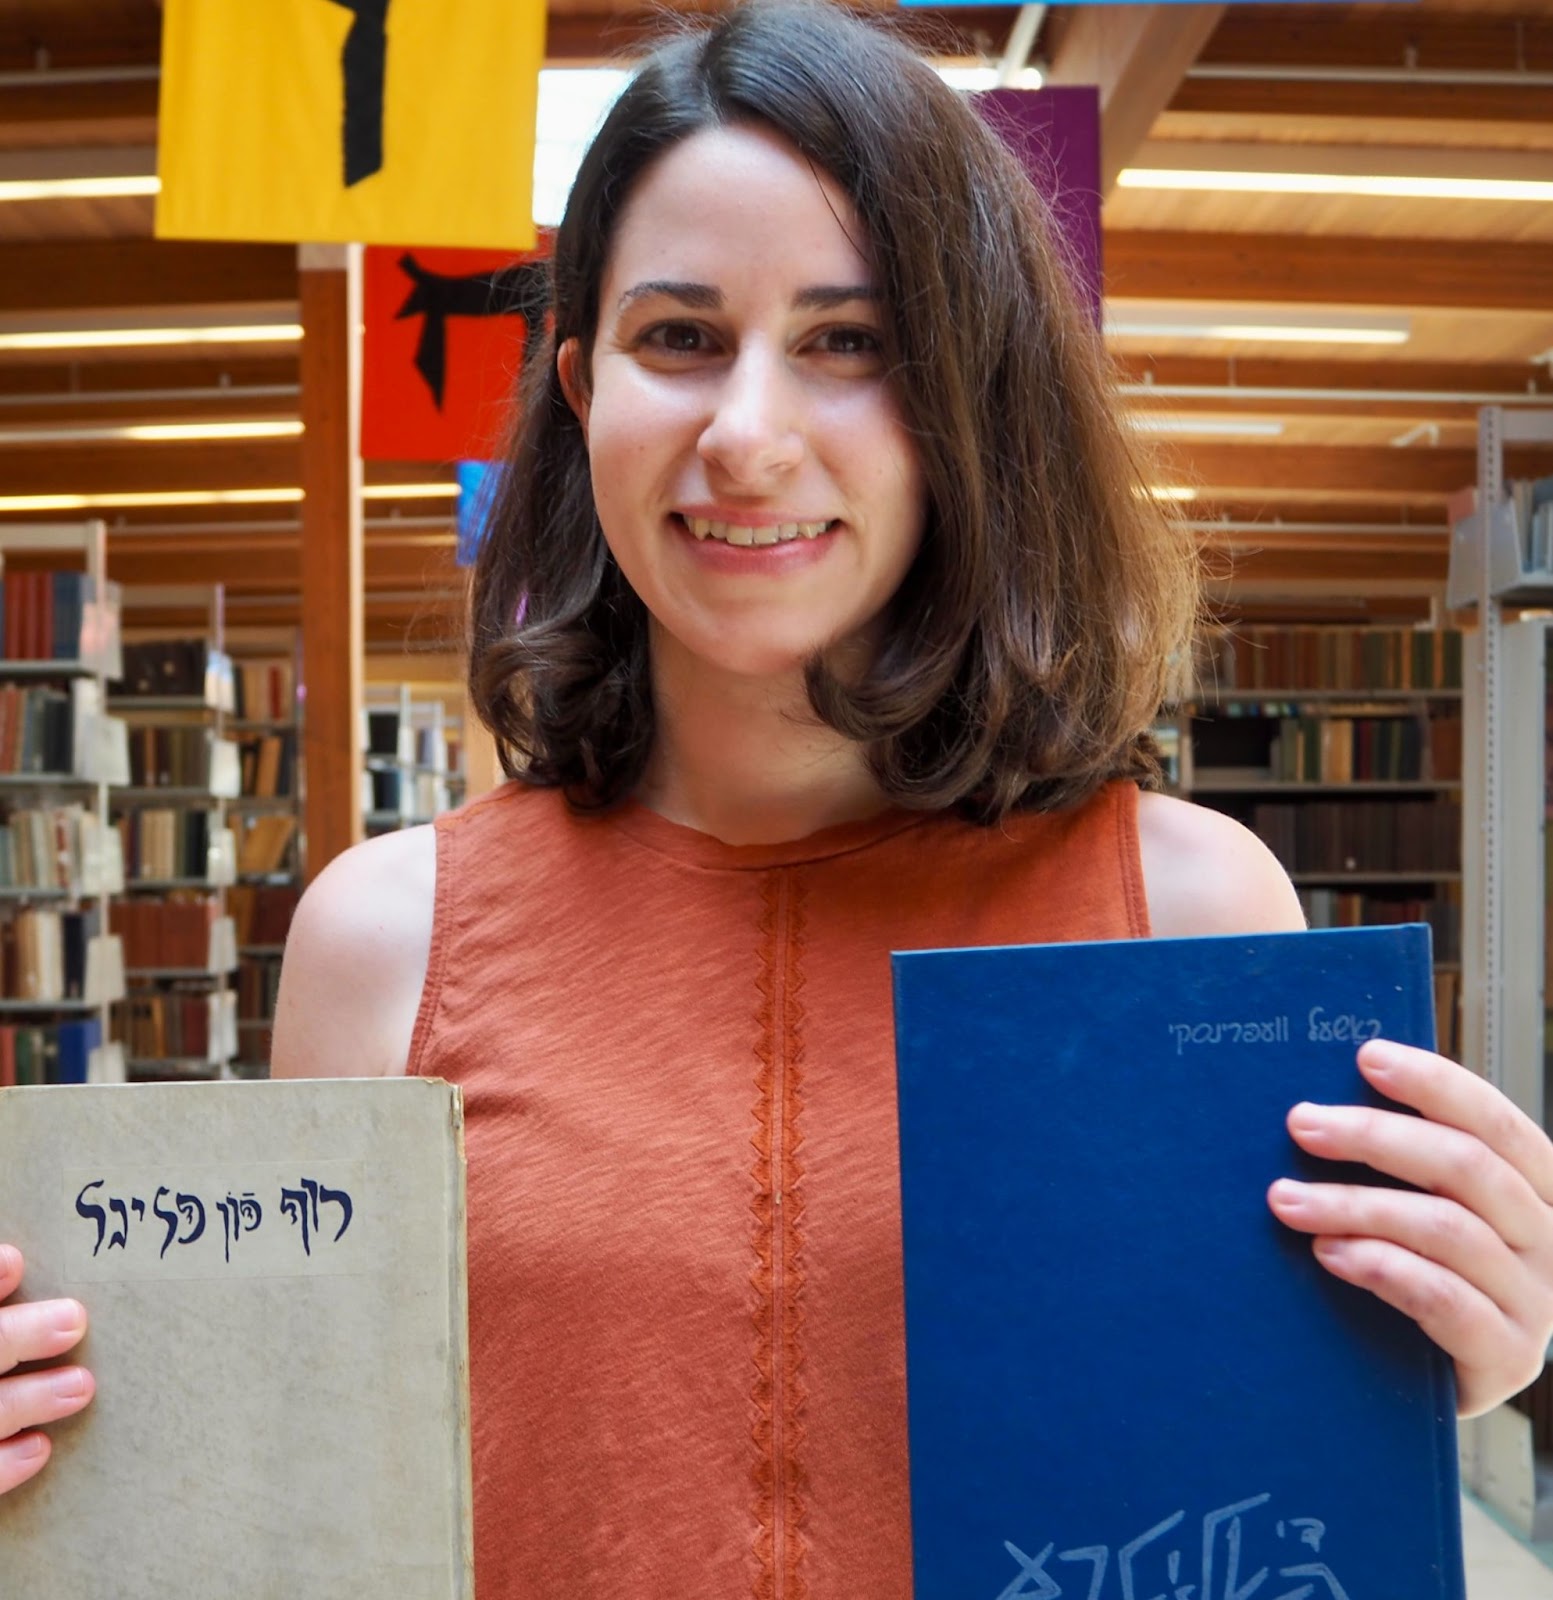 Rebecca Weingart, a white woman with brown shoulder-length hair, smiles at the camera while holding two books, one blue and one tan, with Yiddish writing on the covers. She is wearing a sleeveless orange top and is posing in front of a background of bookshelves.